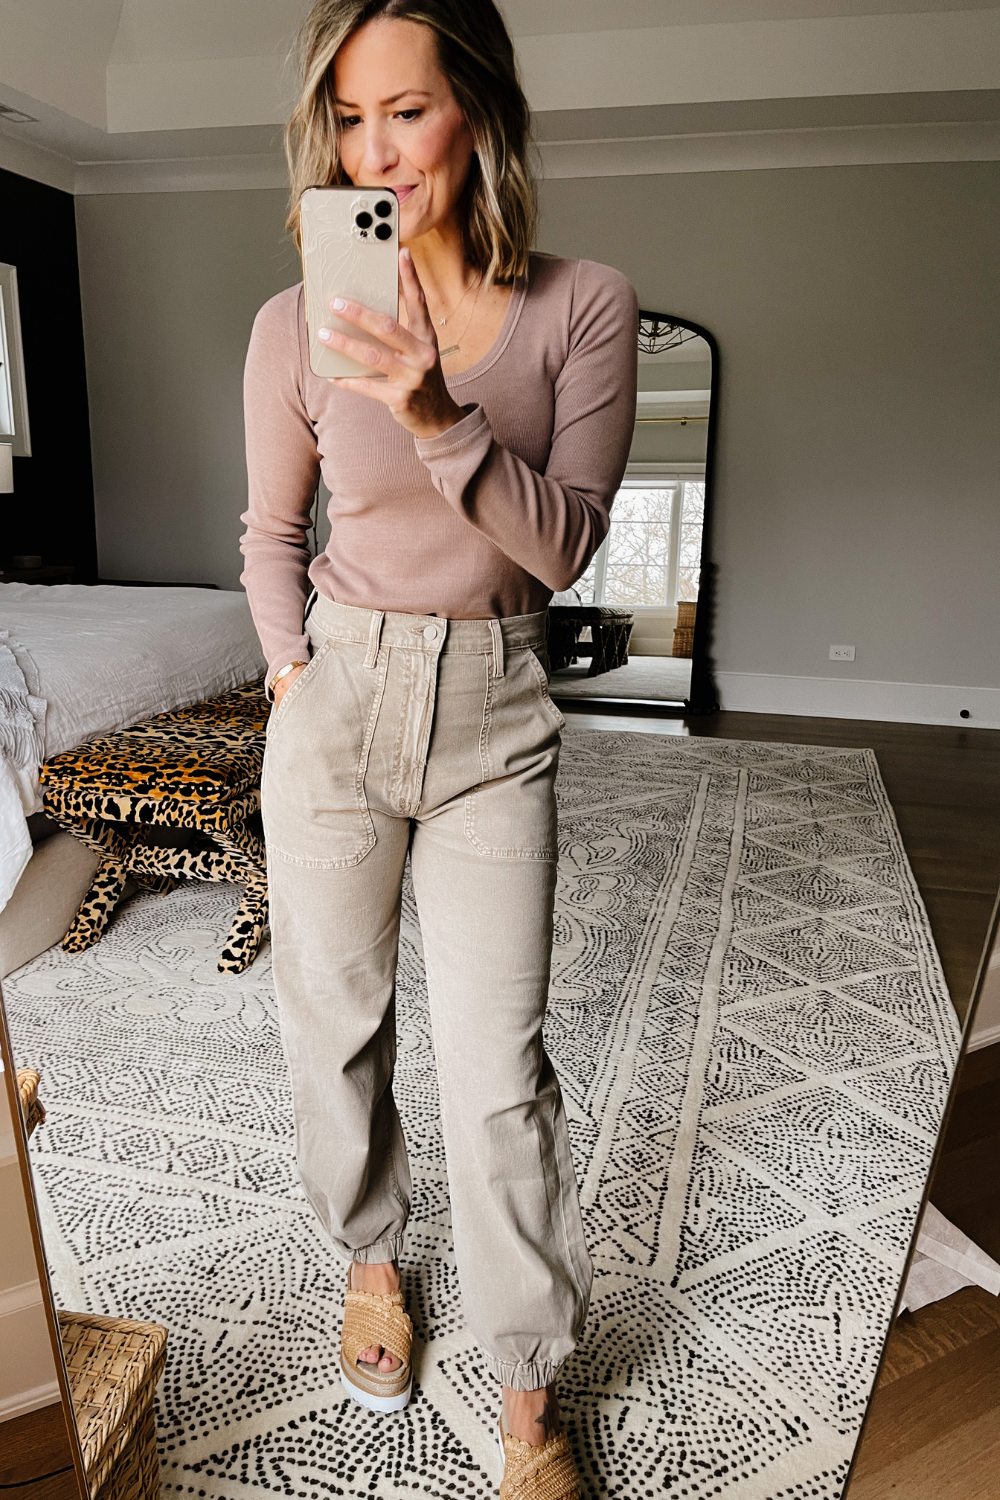 Suzanne taking a mirror selfie wearing a long sleeve top, ankle pants, and wedges. 